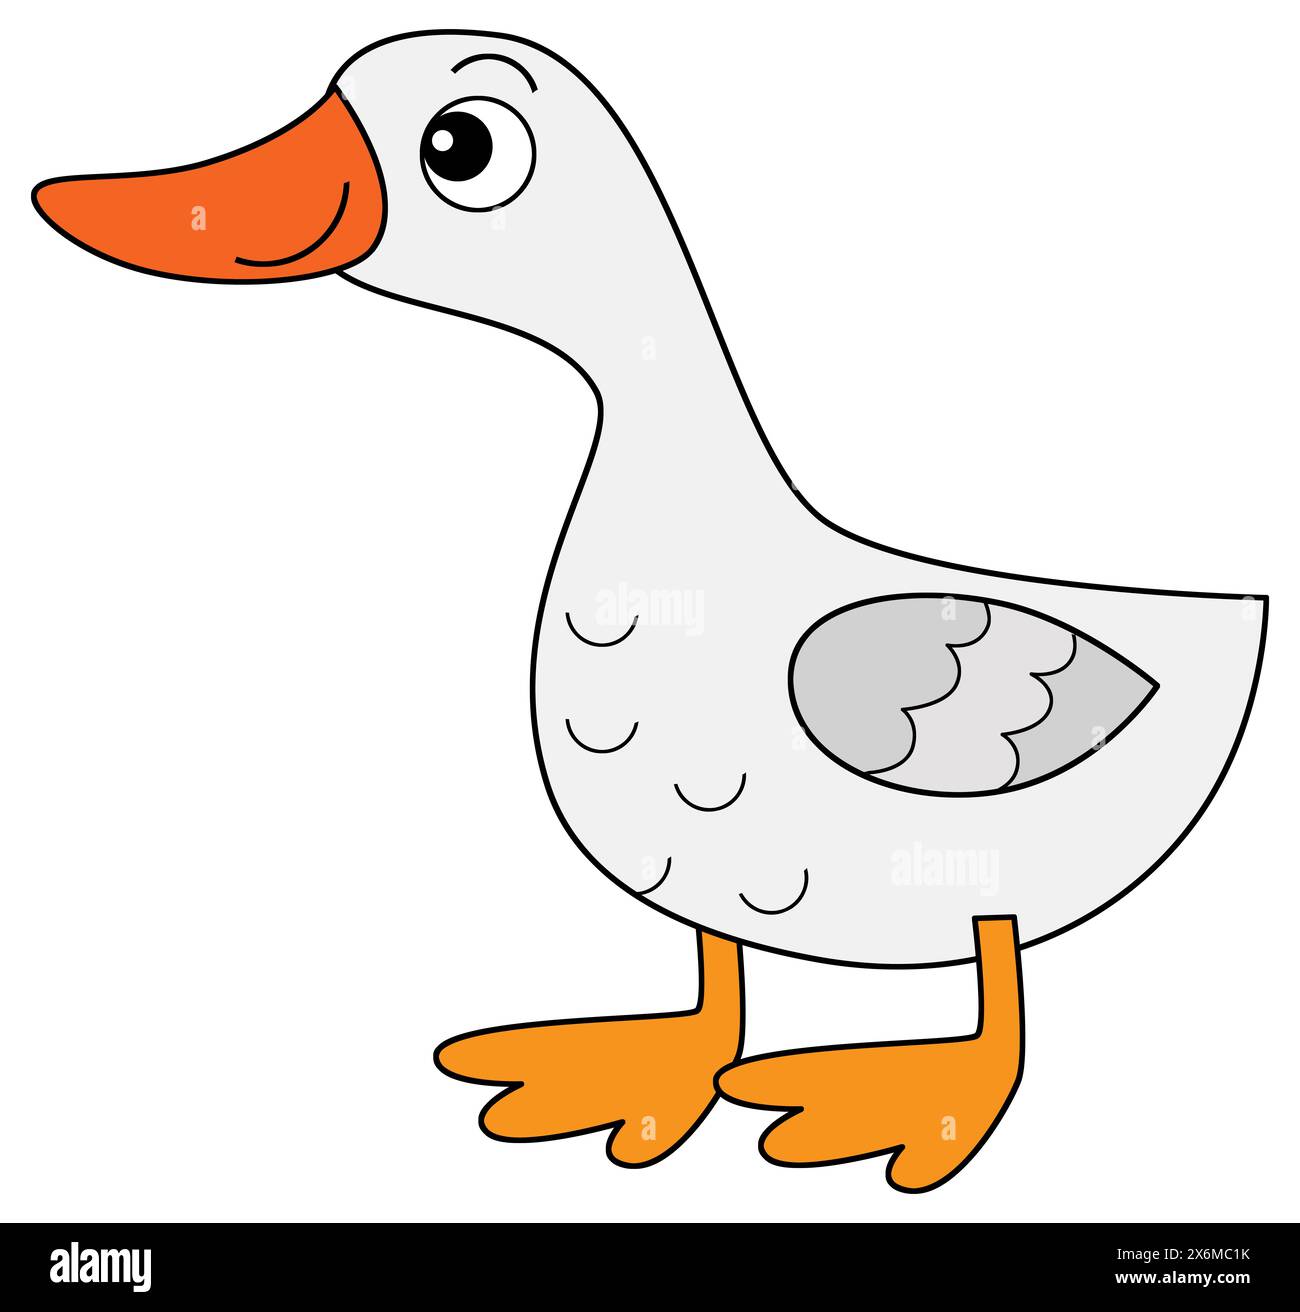 Cartoon happy farm animal cheerful goose bird running isolated background with sketch drawing illustration for kids Stock Photo